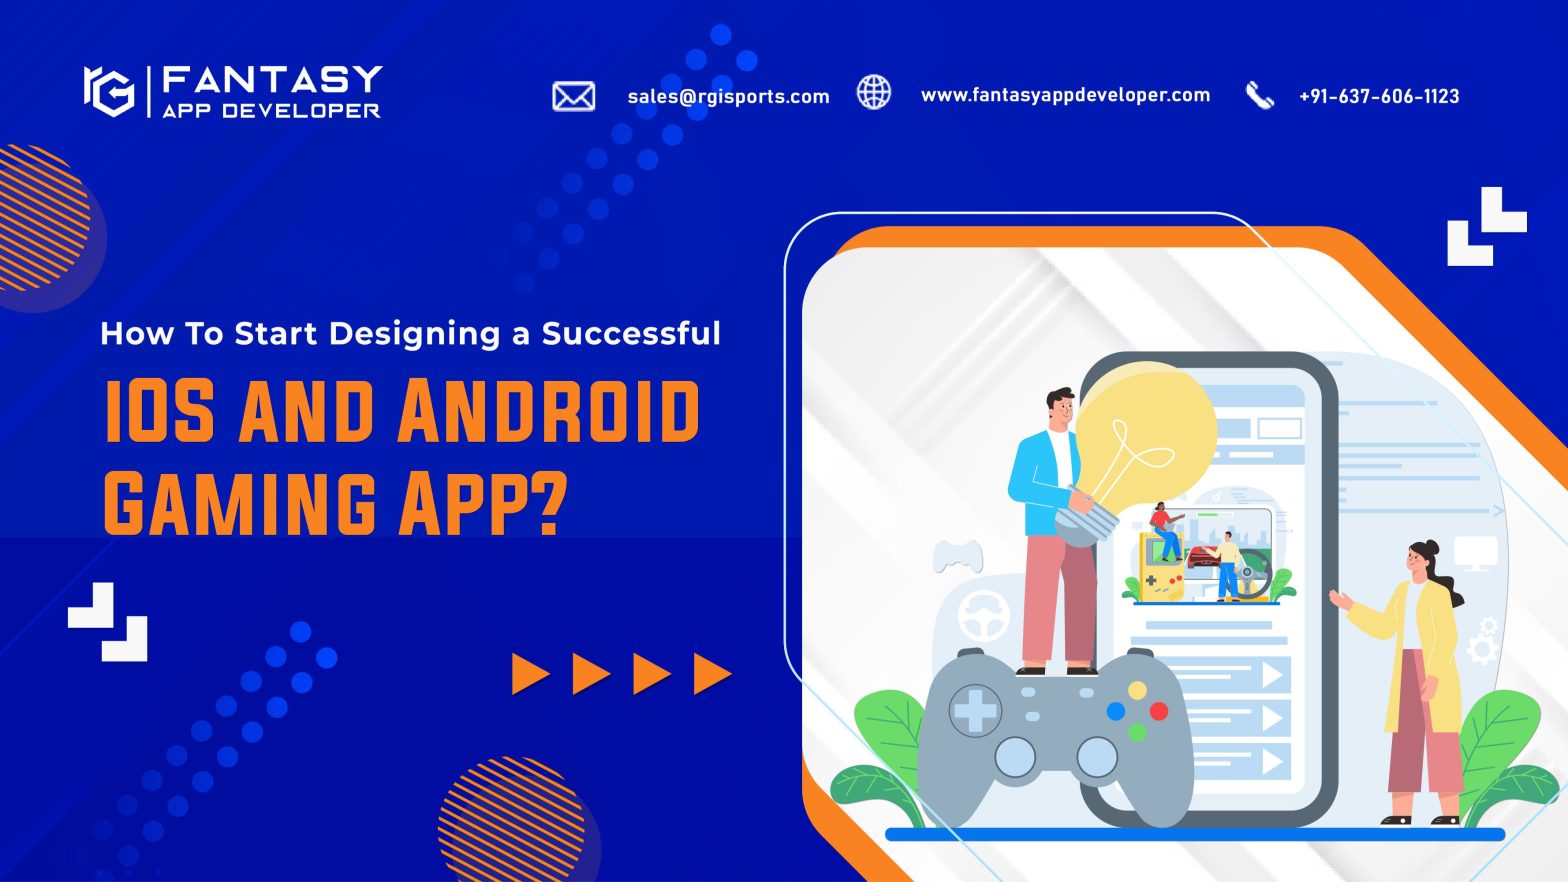 How To Start Designing a Successful iOS and Android Gaming App